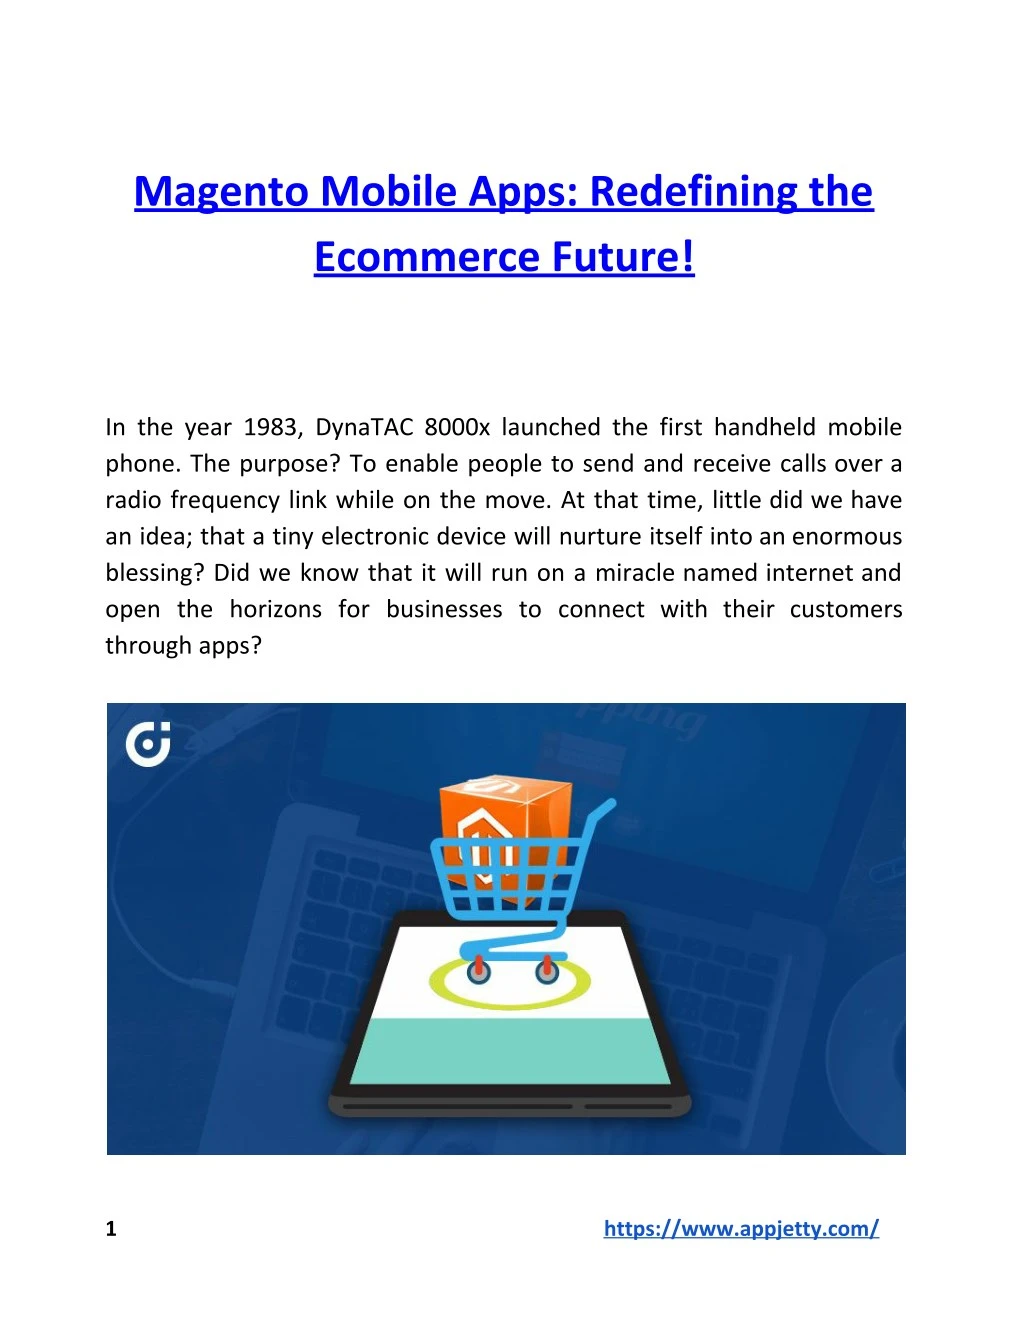 magento mobile apps redefining the ecommerce